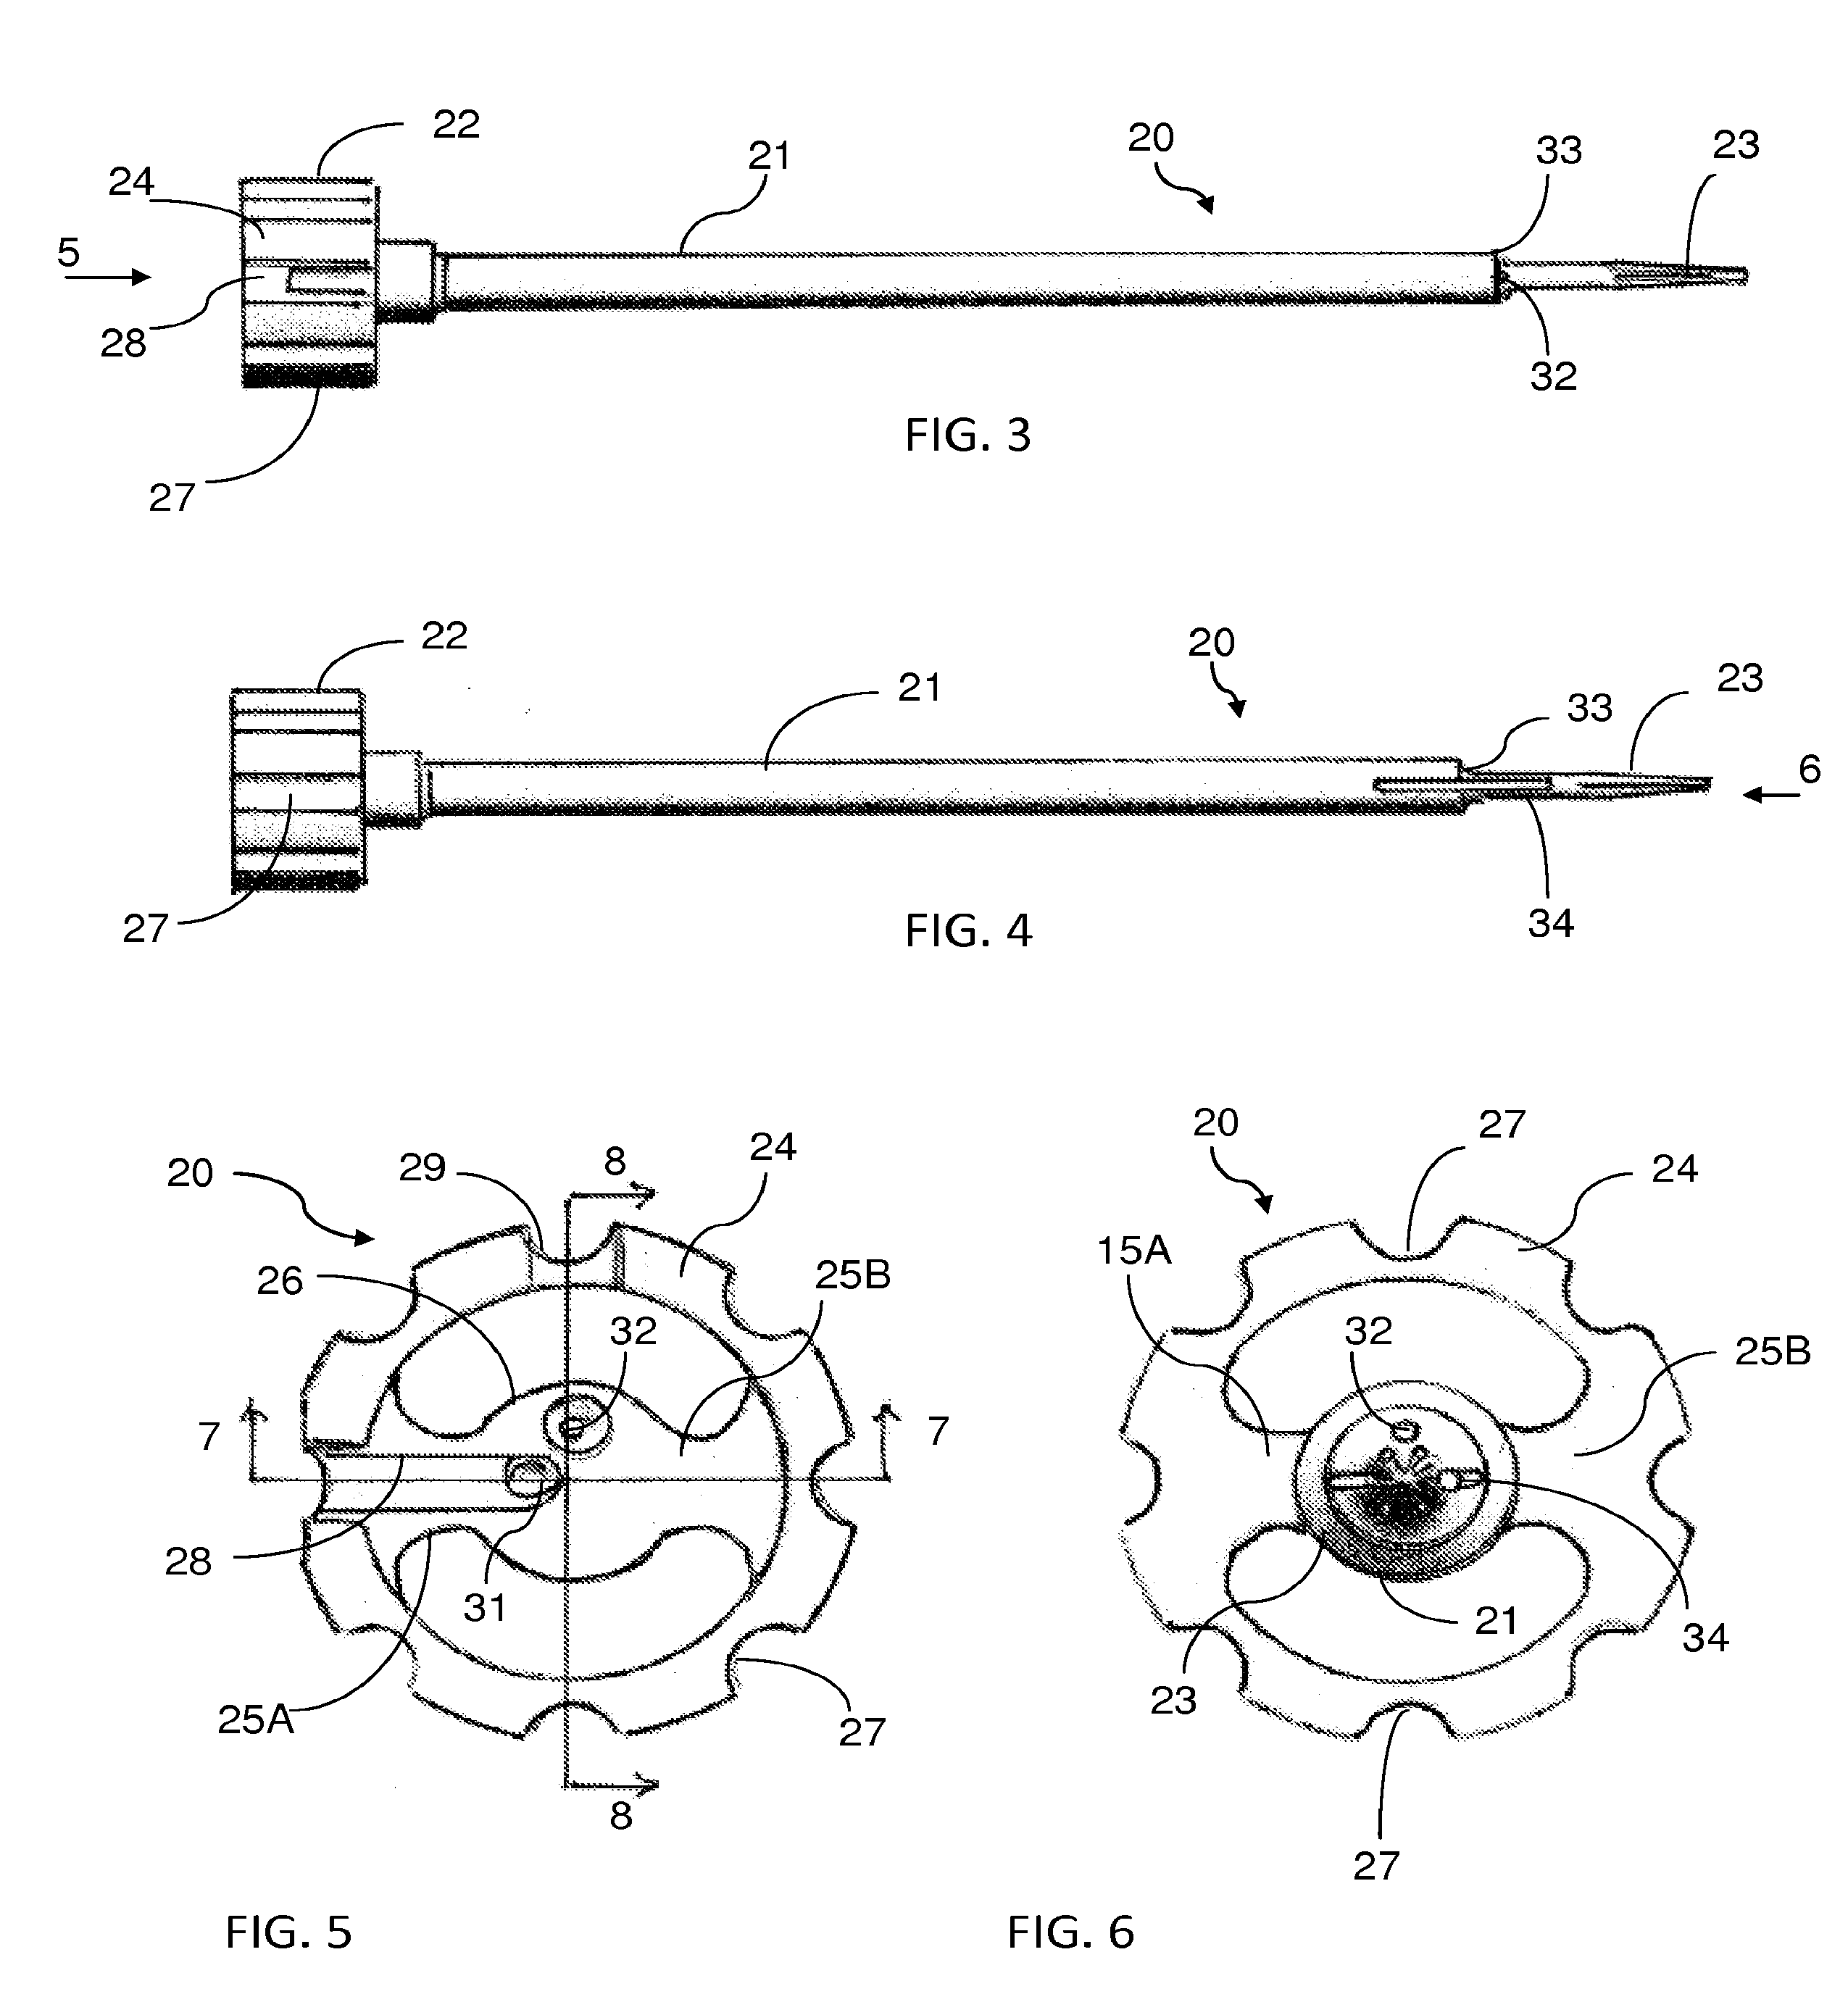 Illuminated endoscopic pedicle probe with dynamic real time monitoring for proximity to nerves